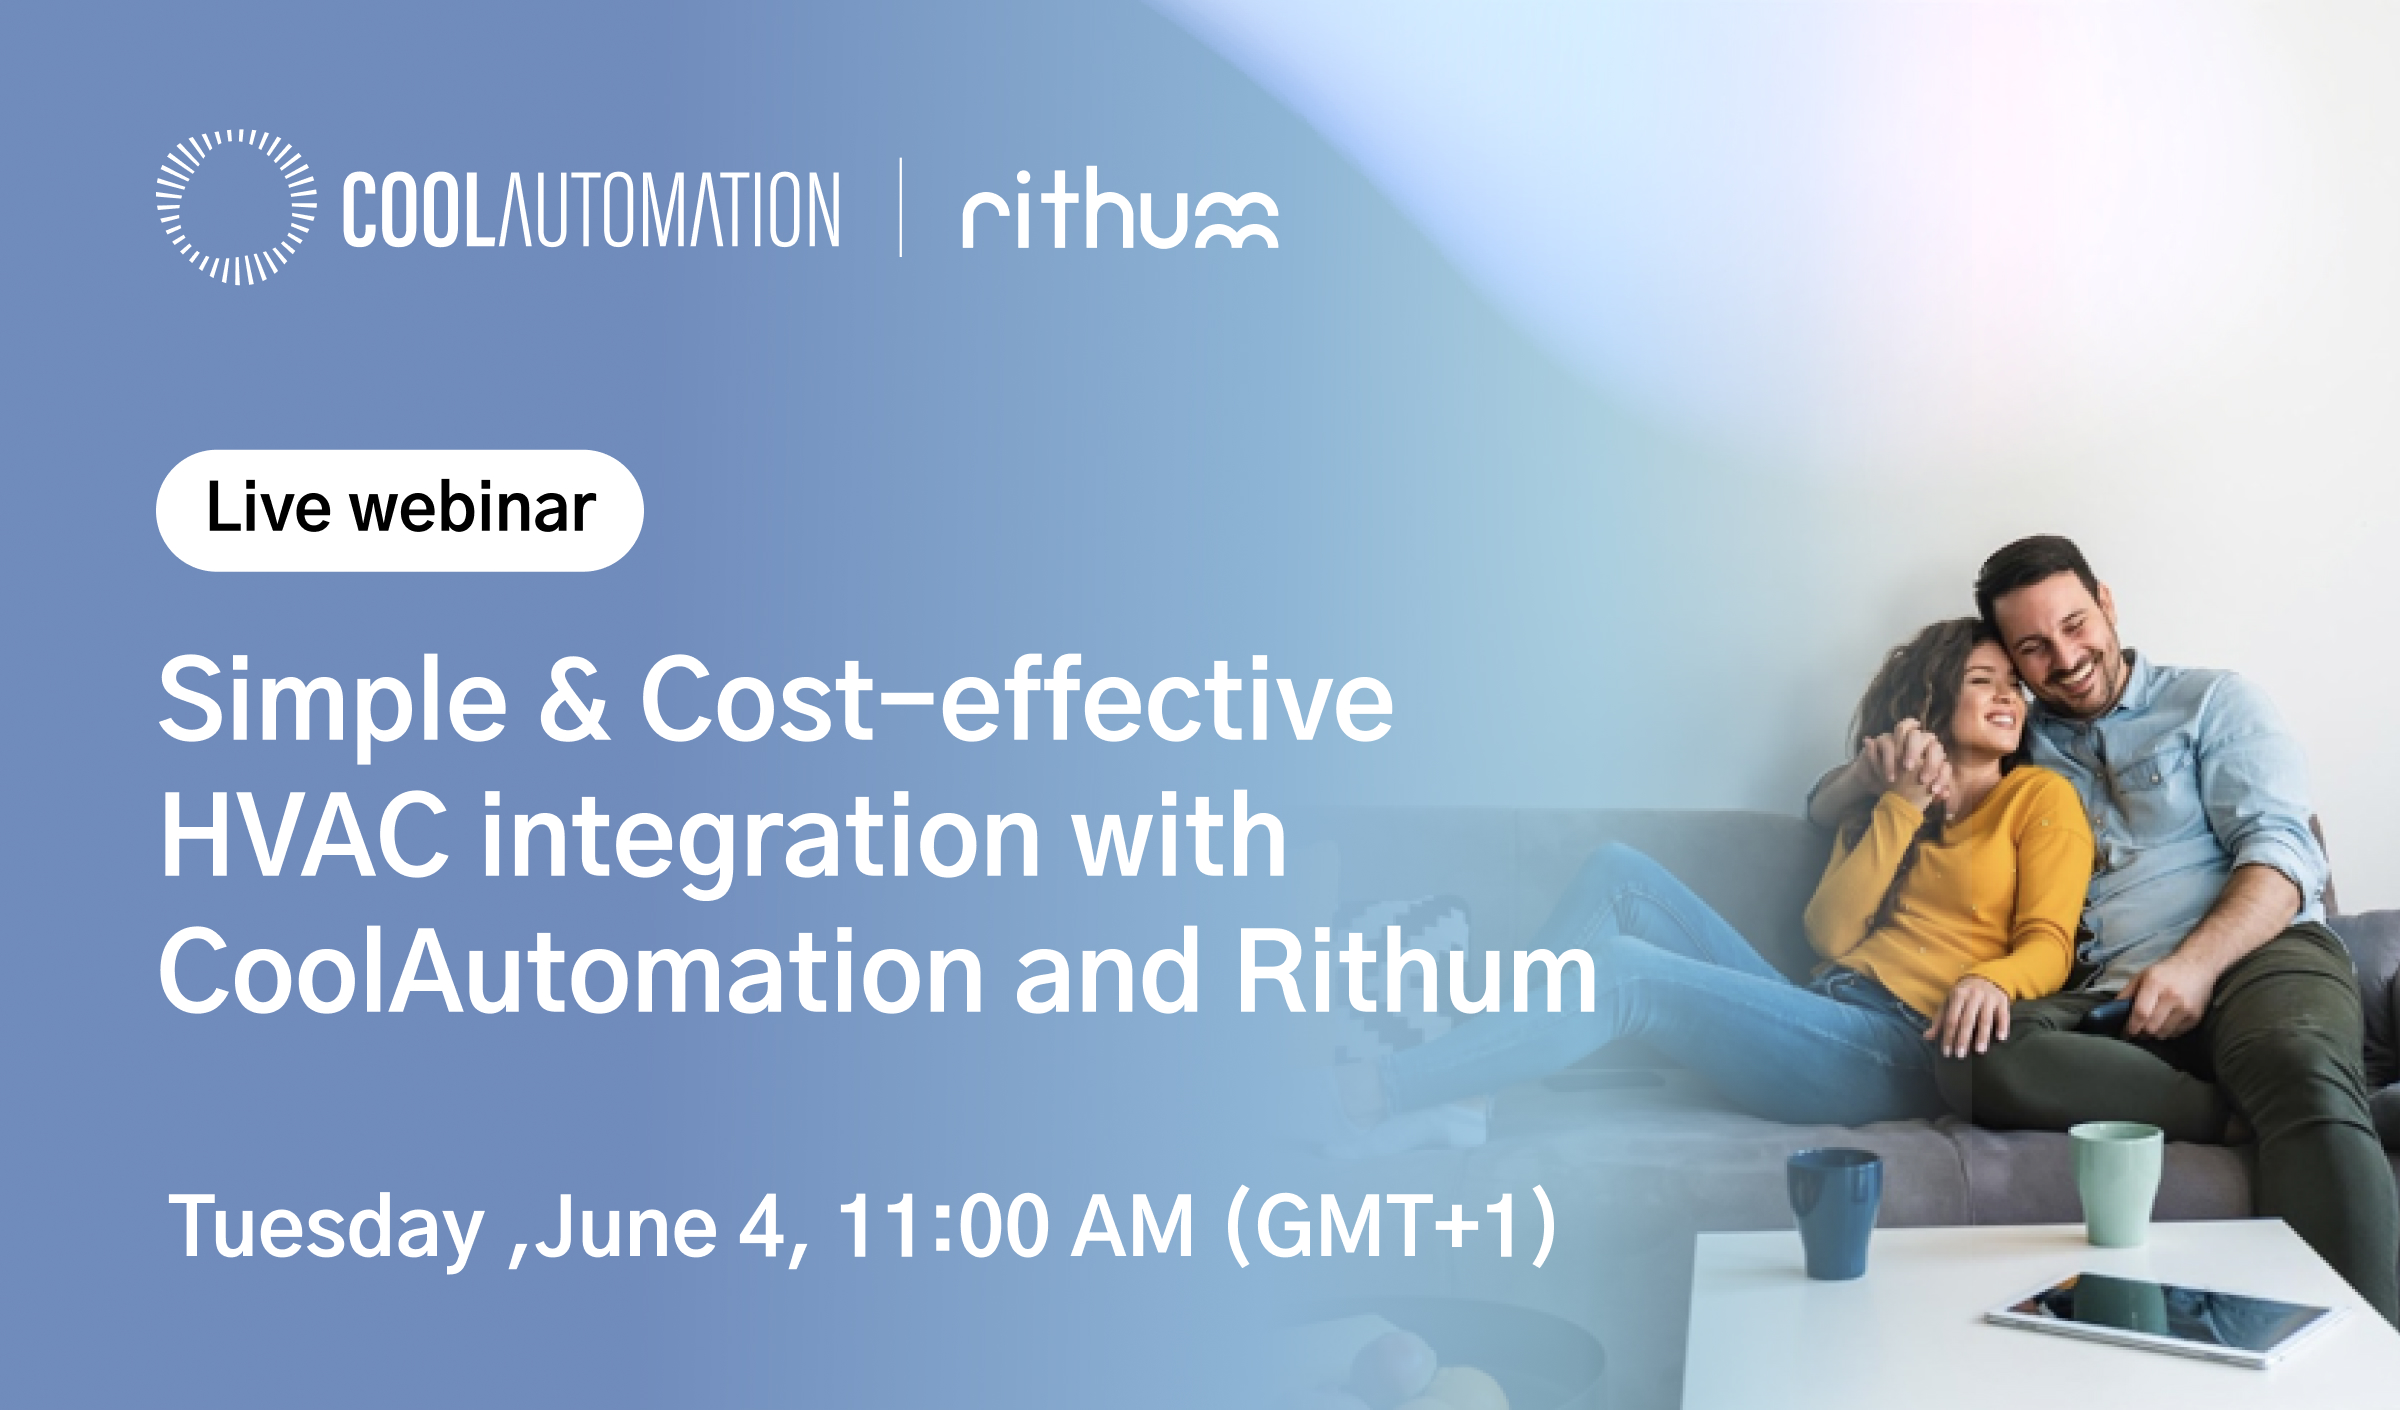 Webinar : Simple & Cost-effective HVAC Integration with CoolAutomation and Rithum